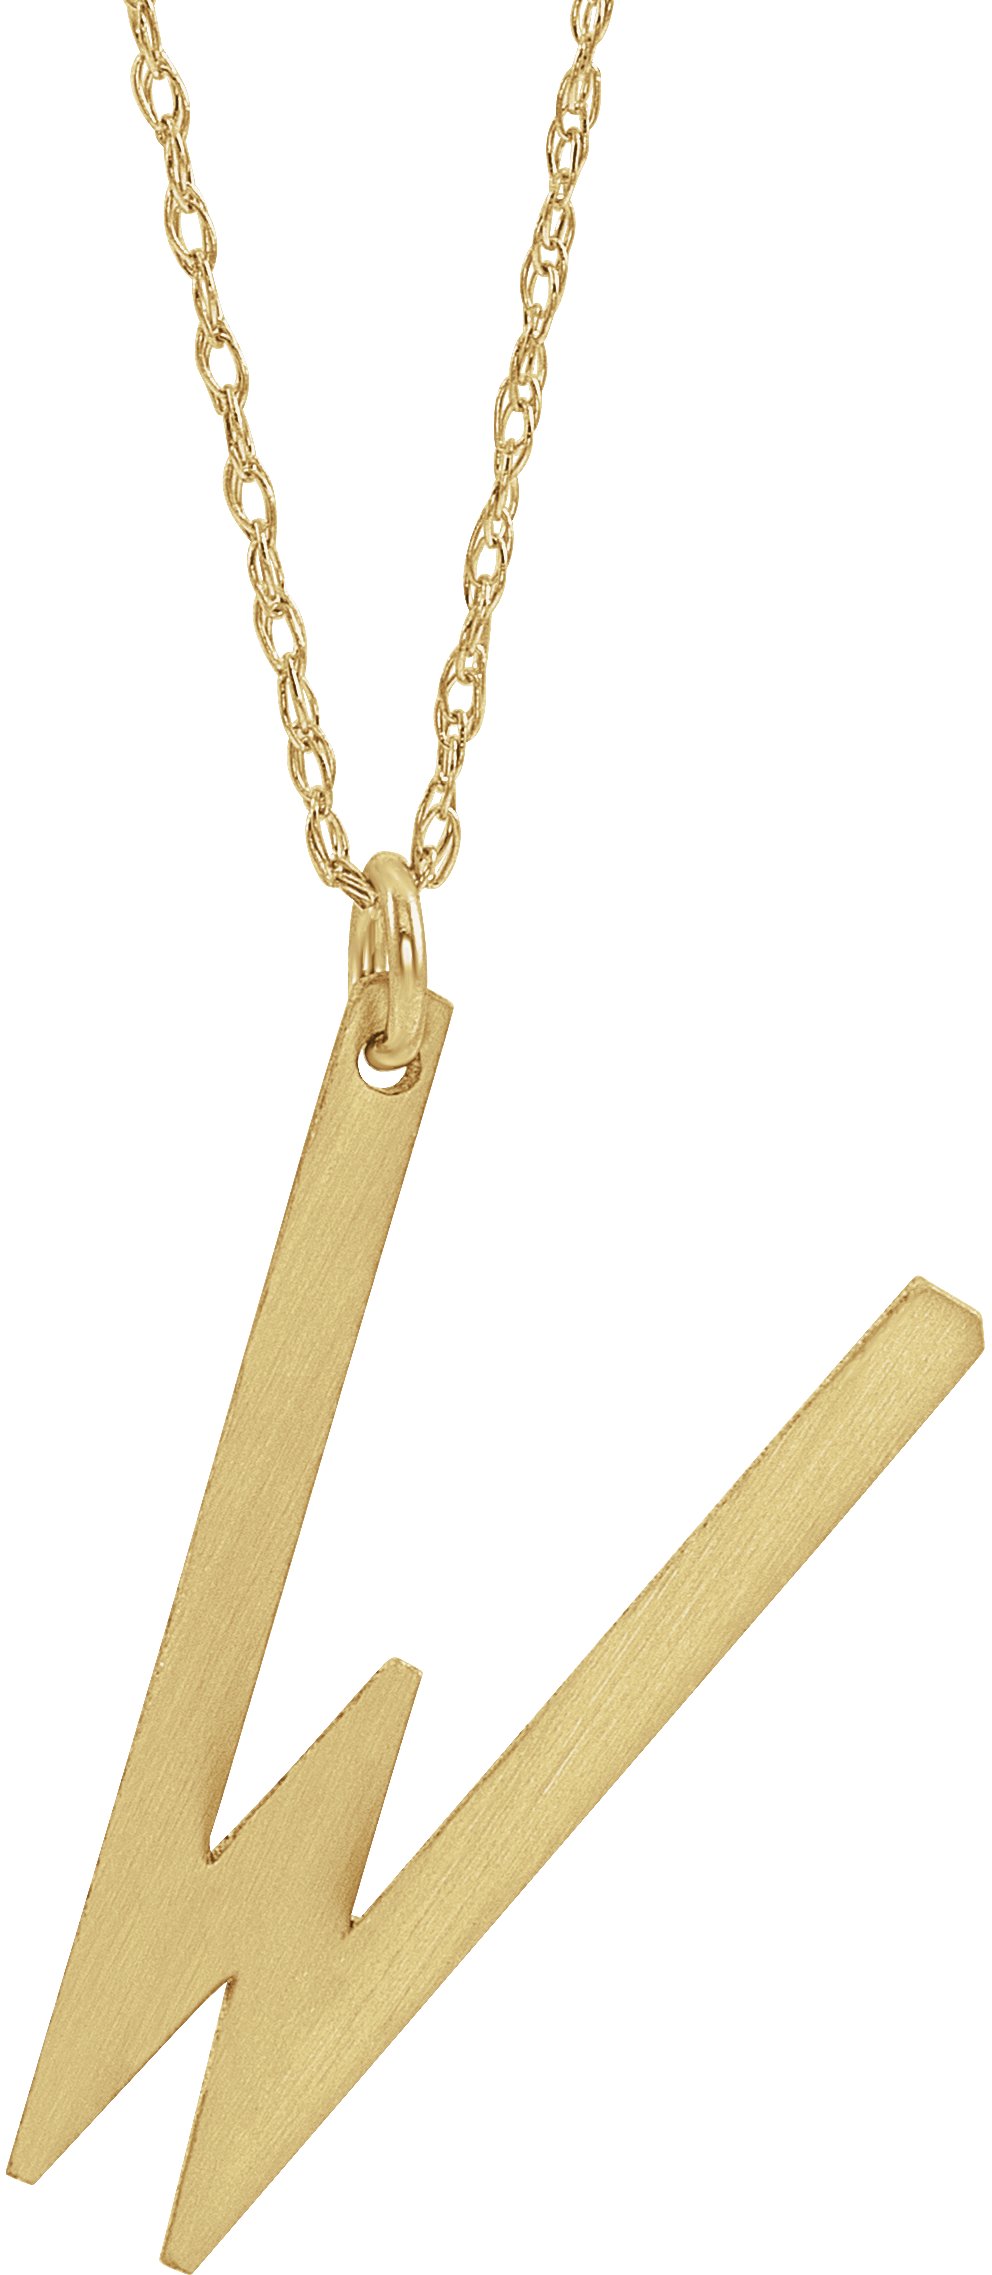 14K Yellow Gold-Plated Sterling Silver Block Initial W 16-18" Necklace with Brush Finish